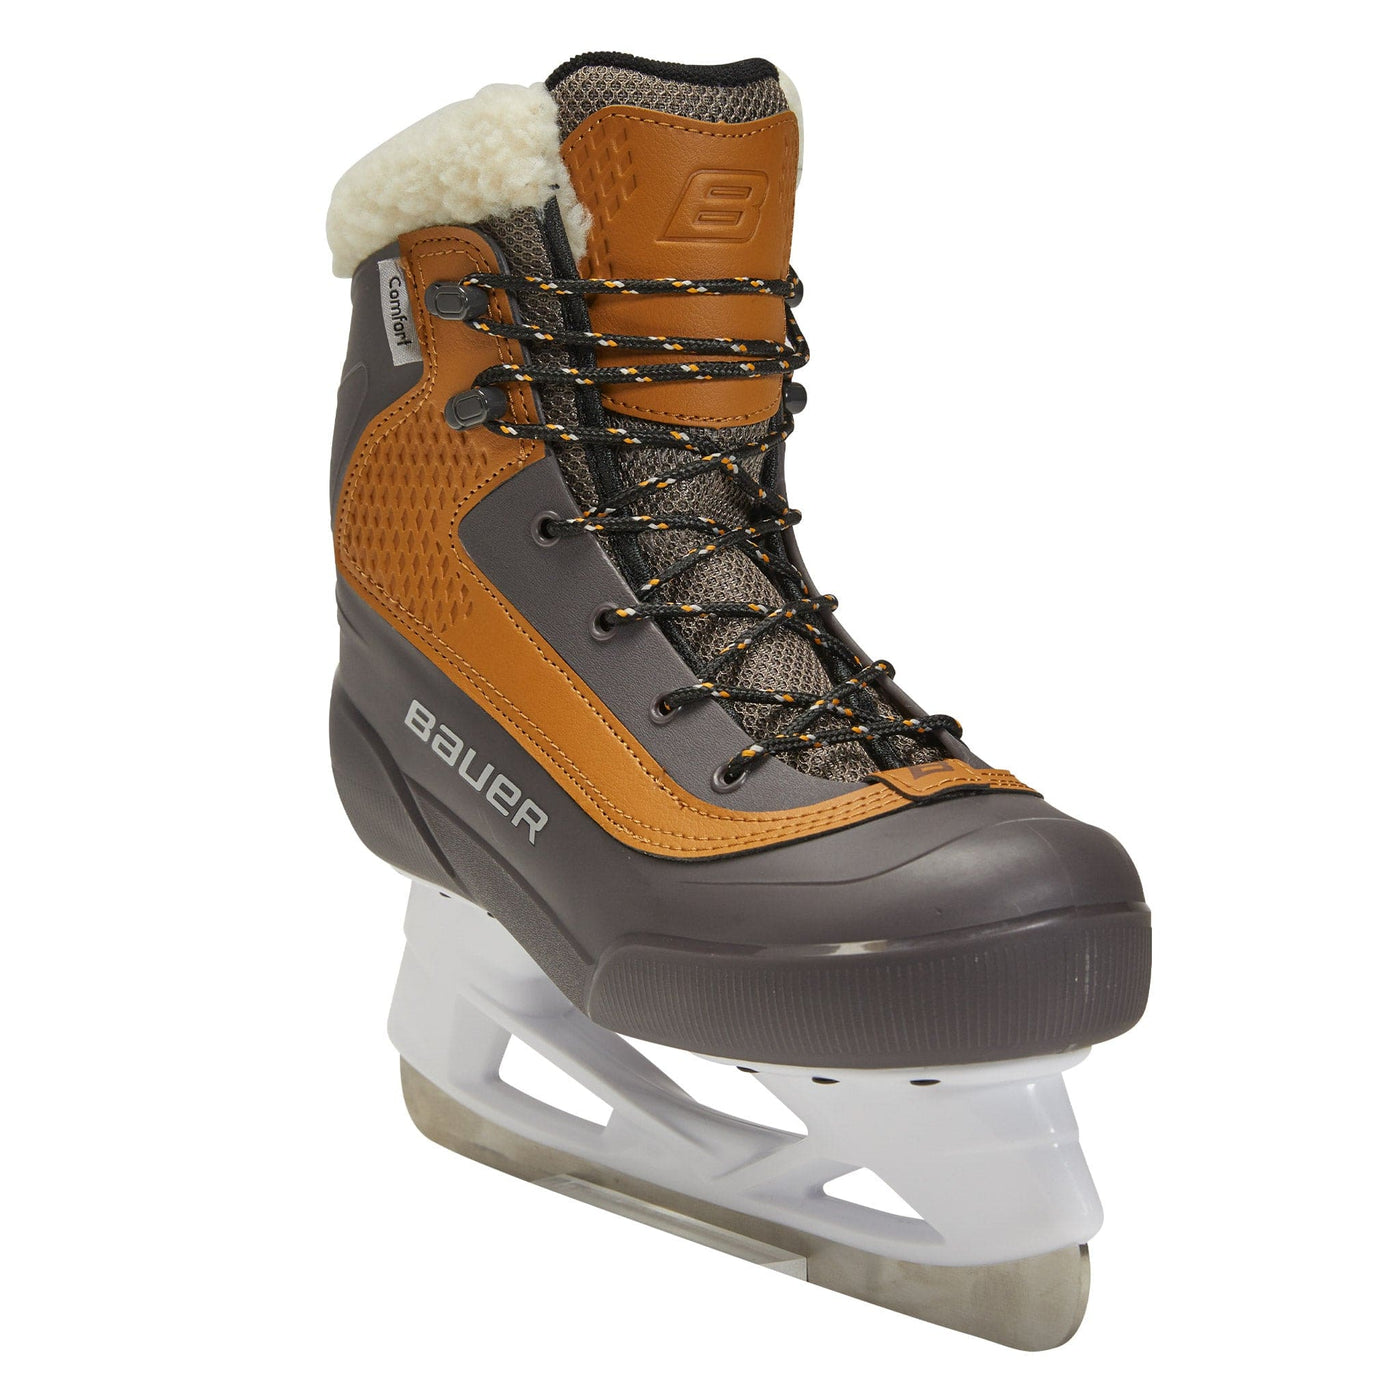 Bauer Whistler Junior Recreational Skates - The Hockey Shop Source For Sports